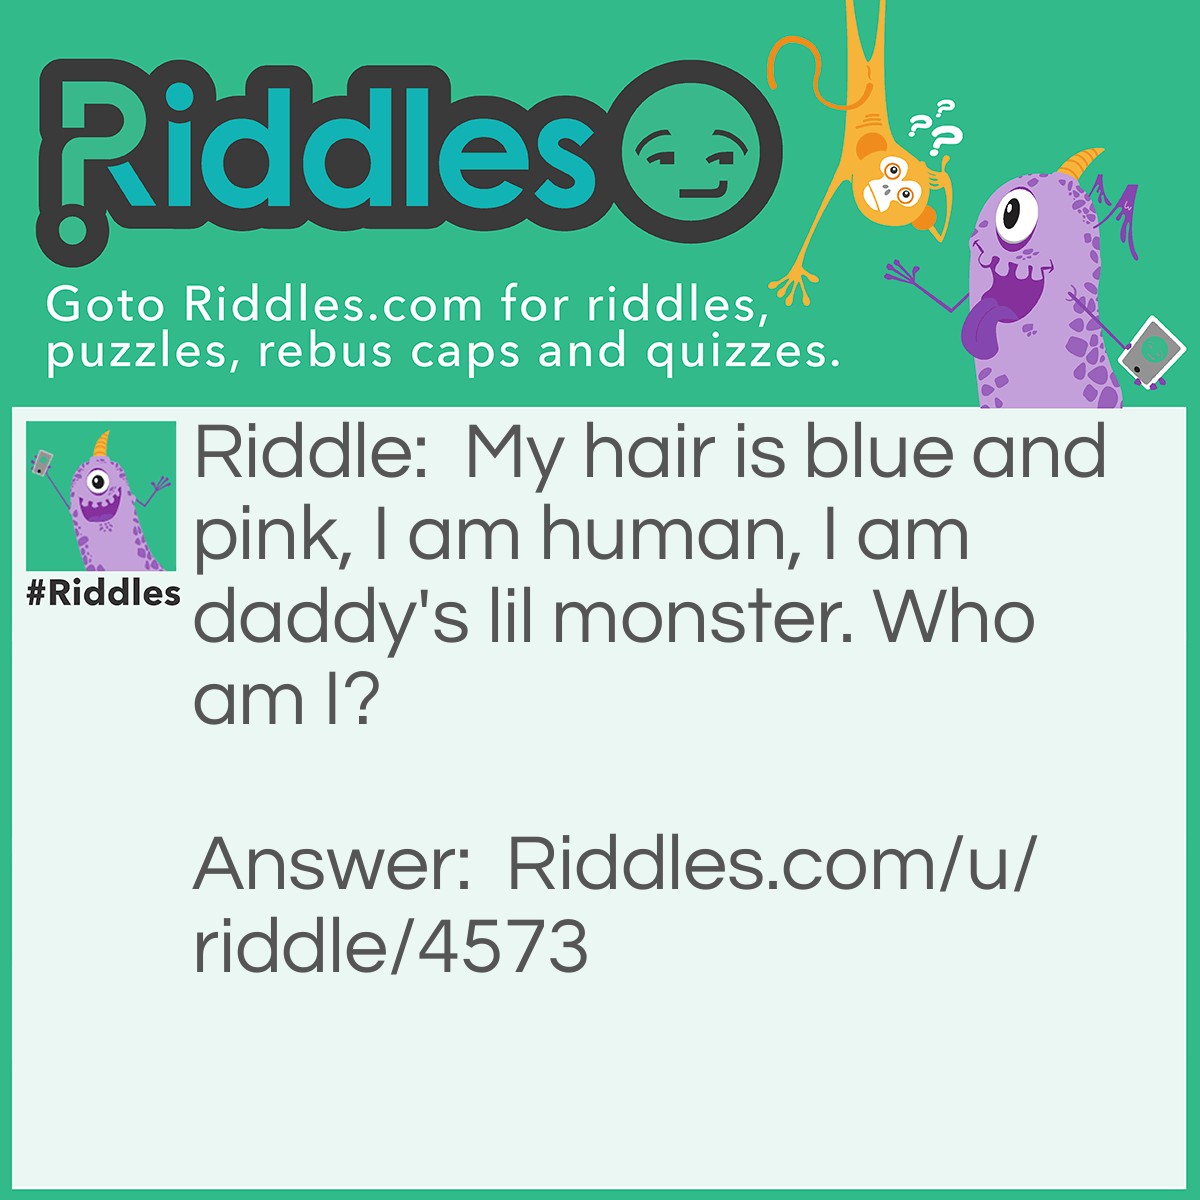 Riddle: My hair is blue and pink, I am human, I am daddy's lil monster. Who am I? Answer: Harley Quinn.